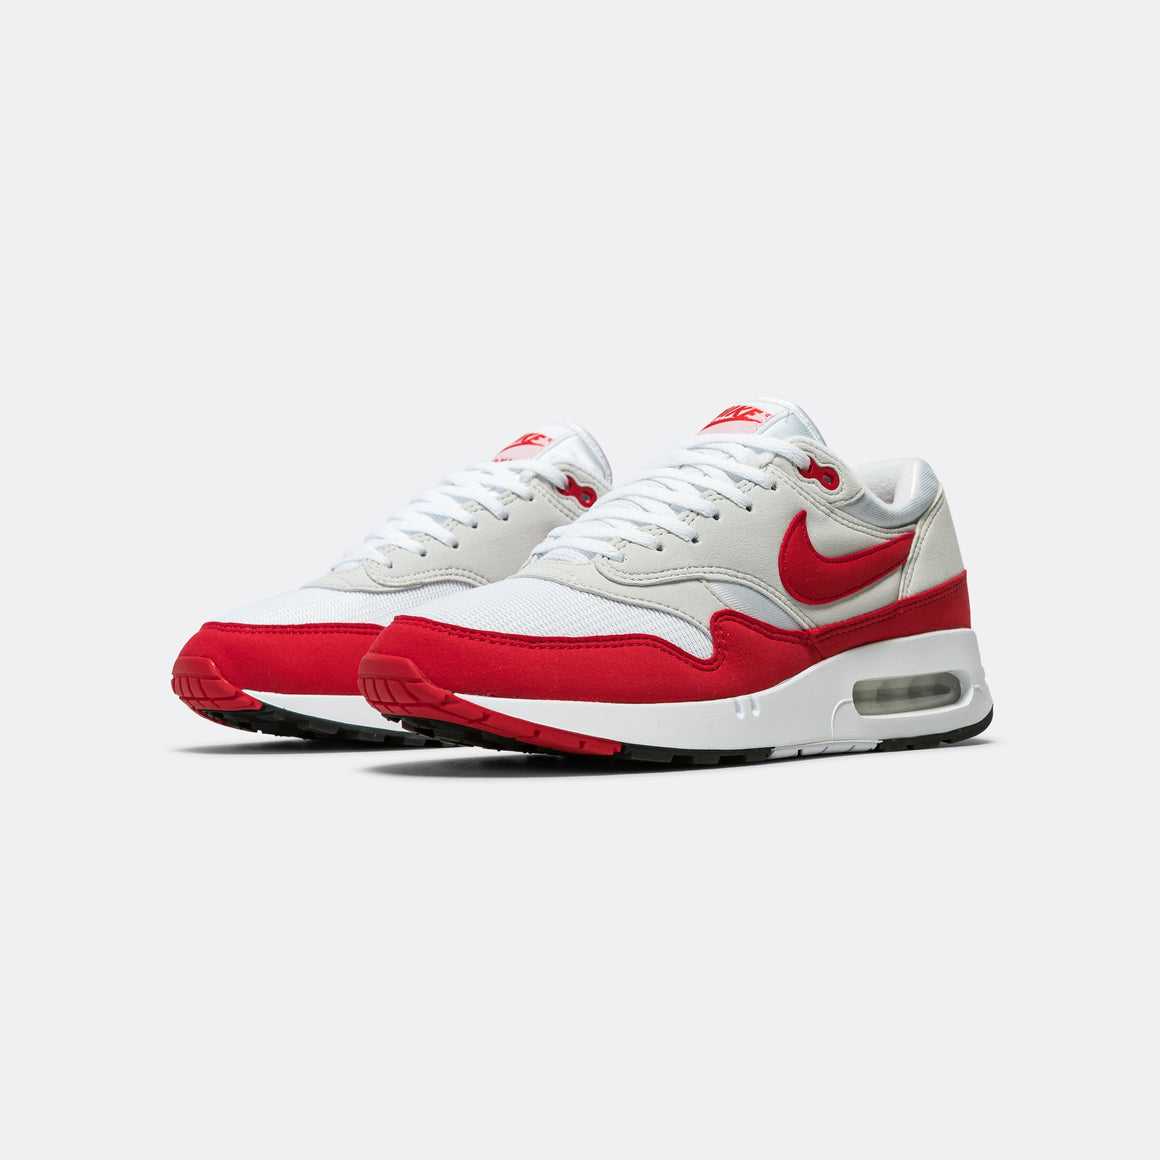 Nike - Air Max 1 '86 OG "Big Bubble" - White/University Red-Lt Neutral Grey - UP THERE